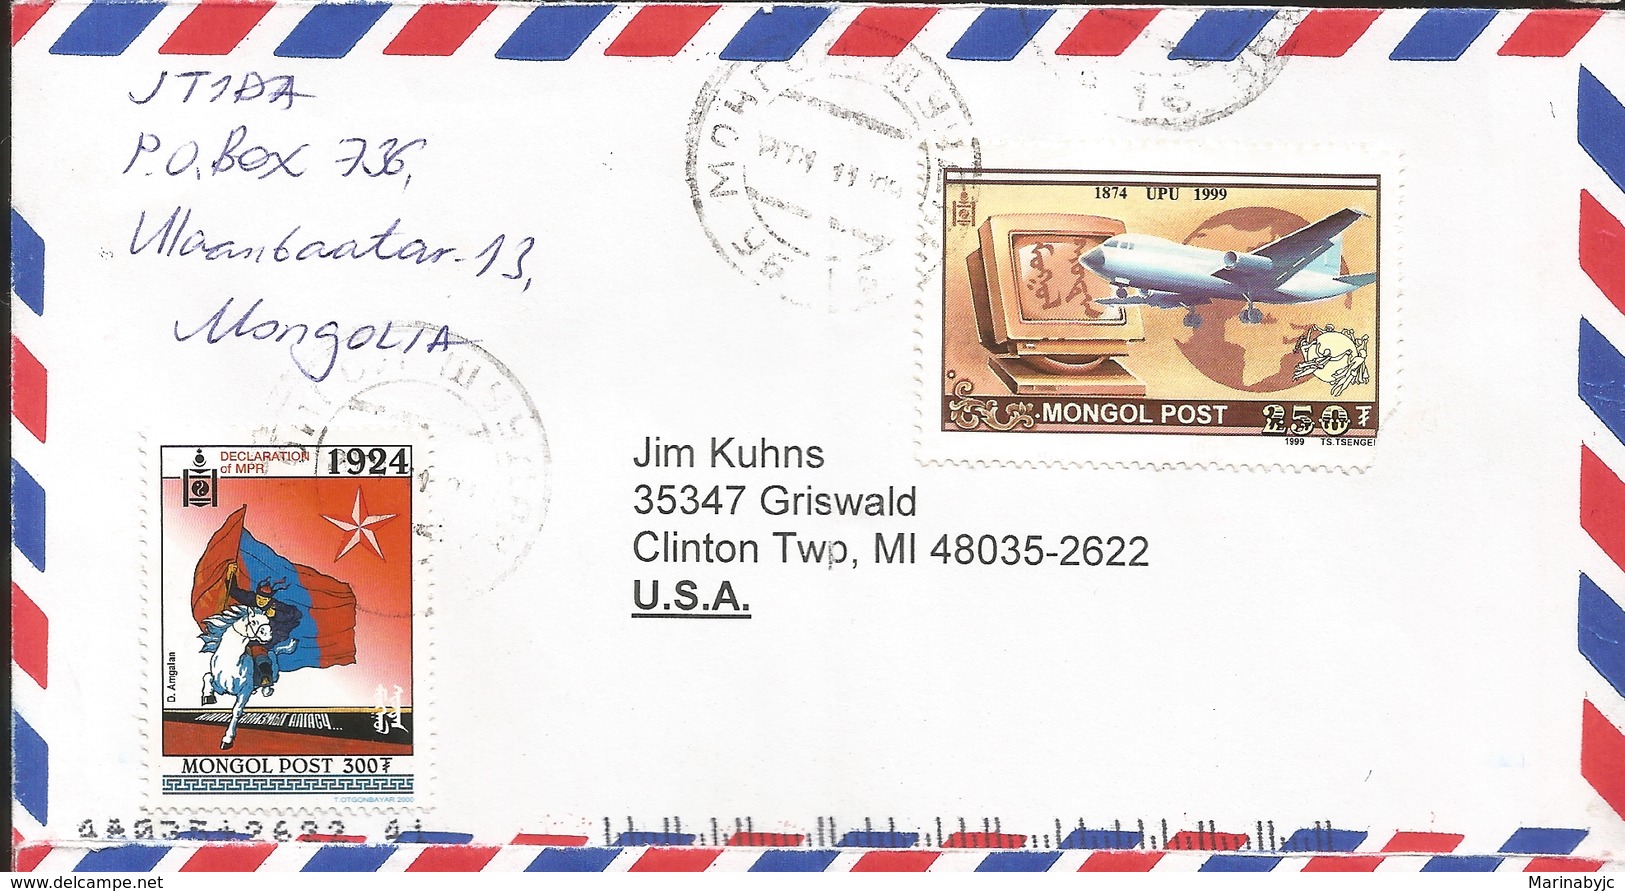 M) 1996, MONGOLIA, AIRPLANE, COMPUTERM HORSE, STAR, CIRCULATED COVER FROM MONGOLIA TO USA. - Mongolia